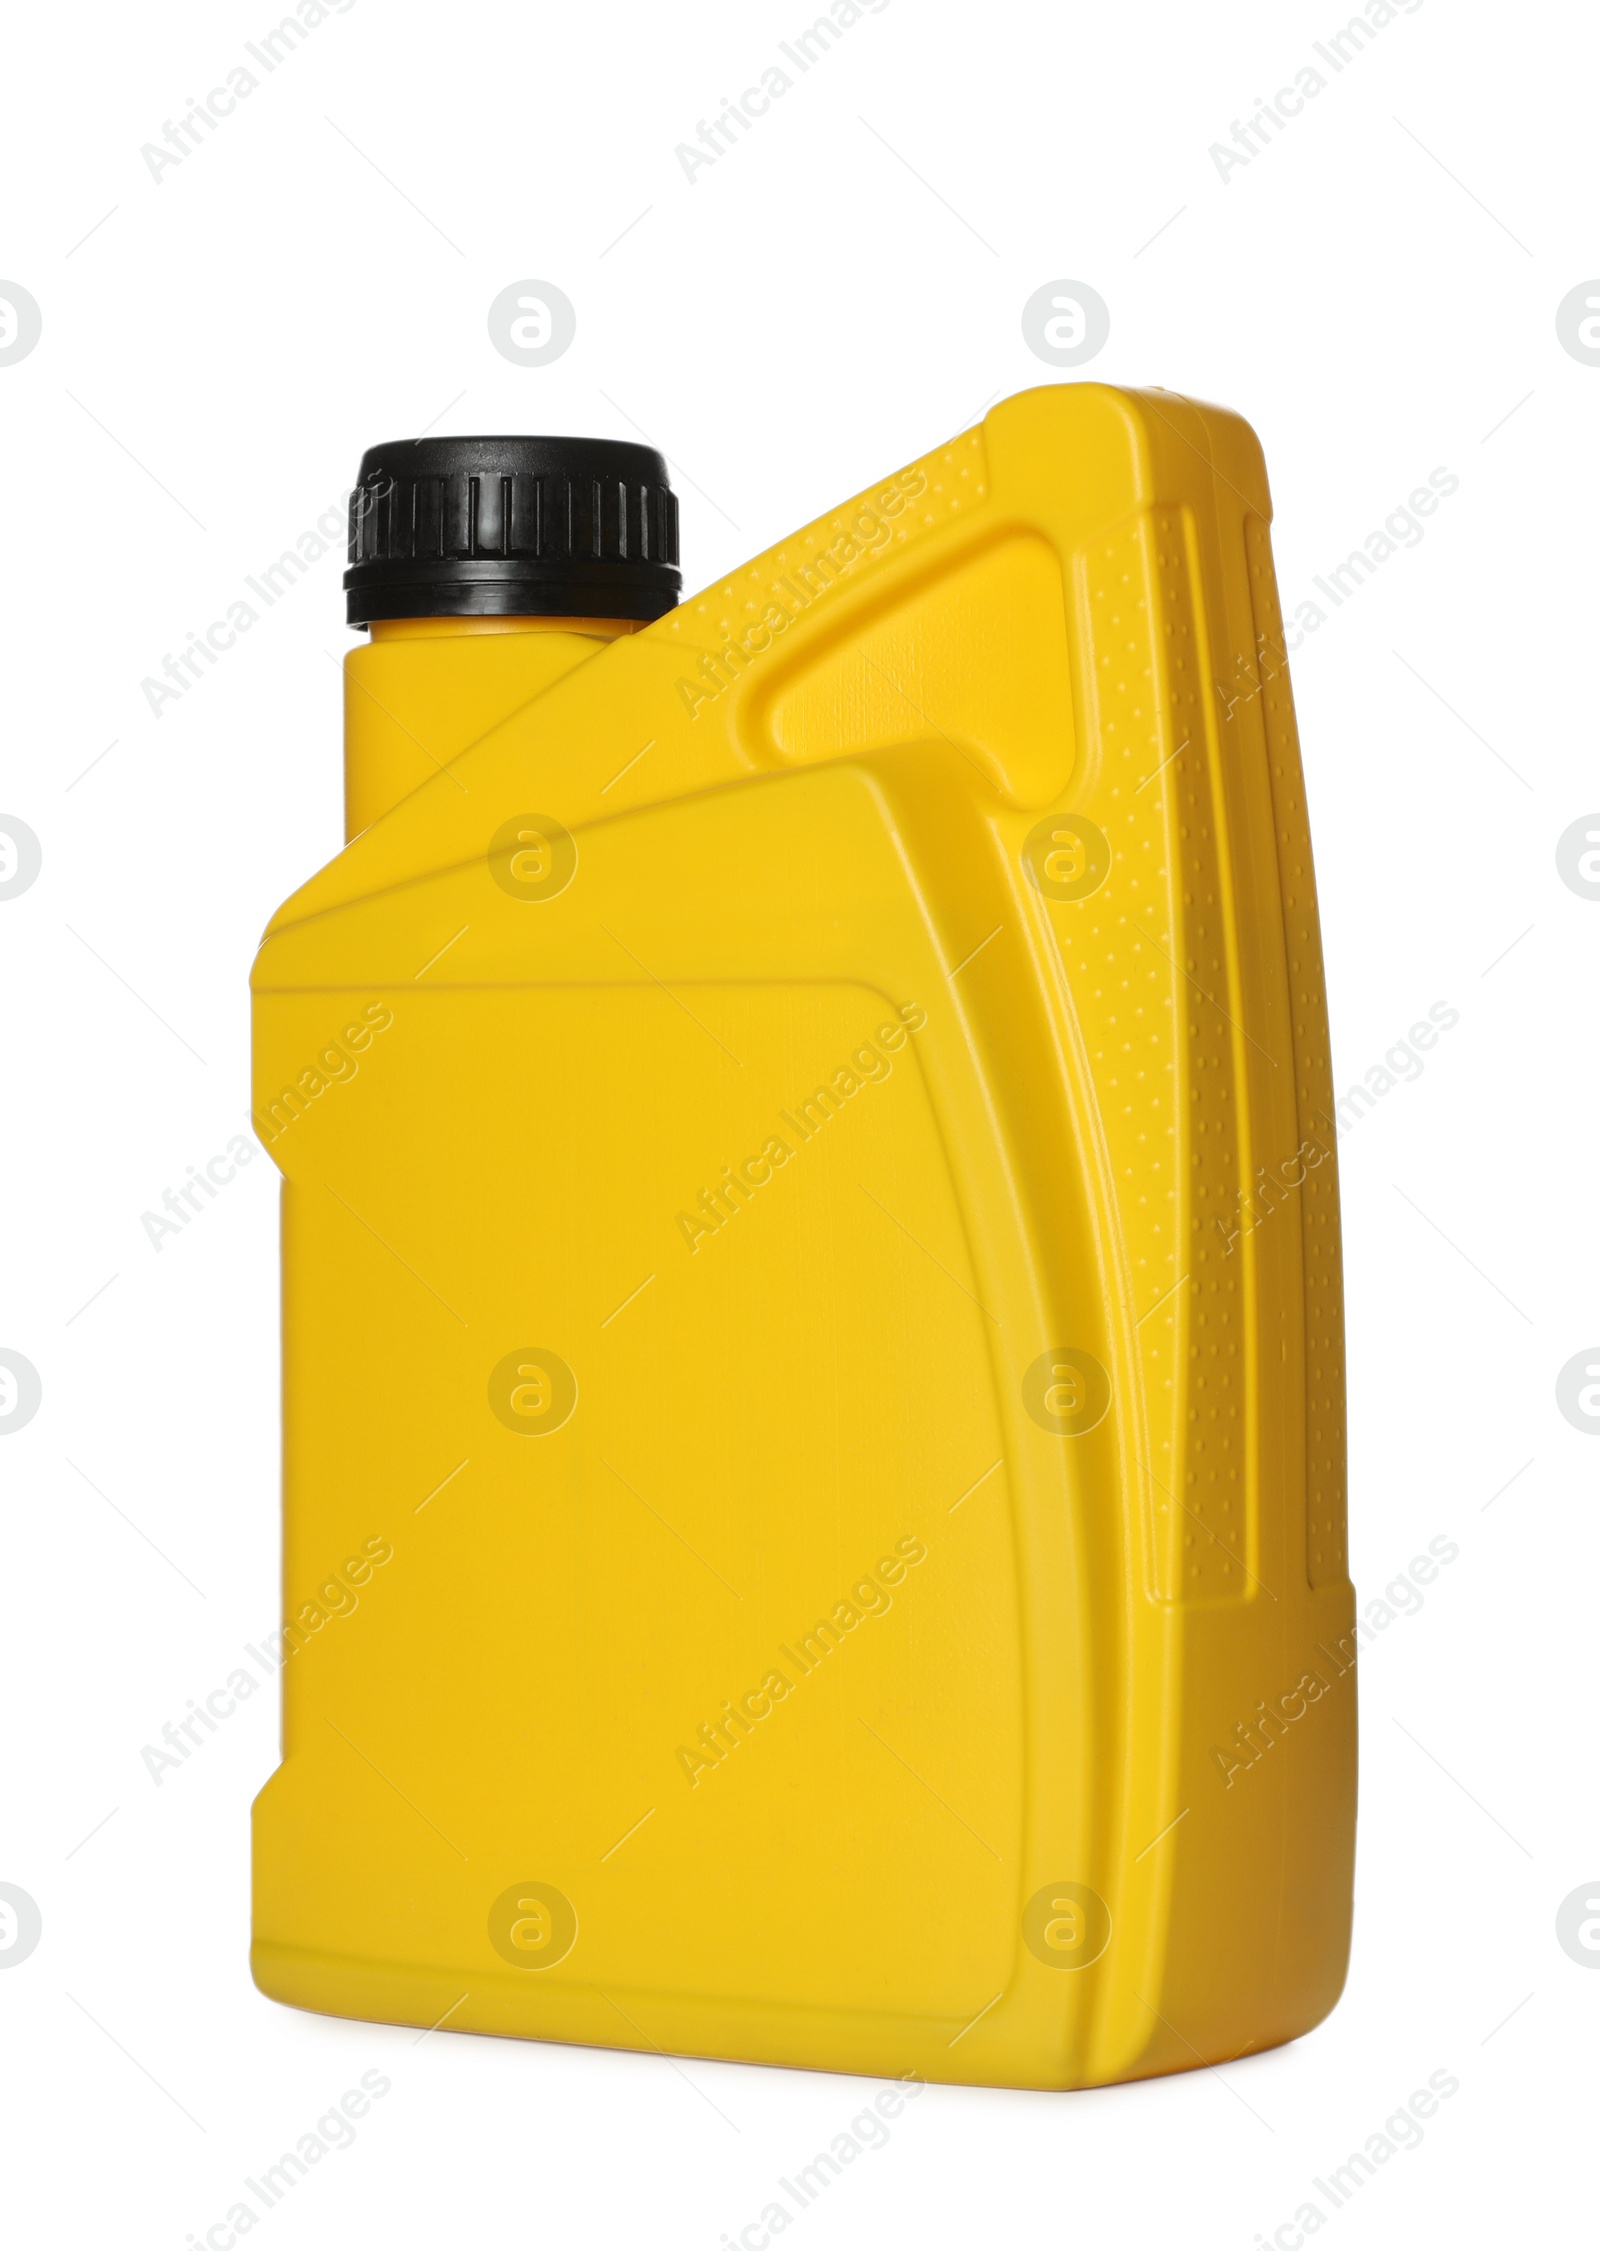 Photo of Motor oil in yellow container isolated on white